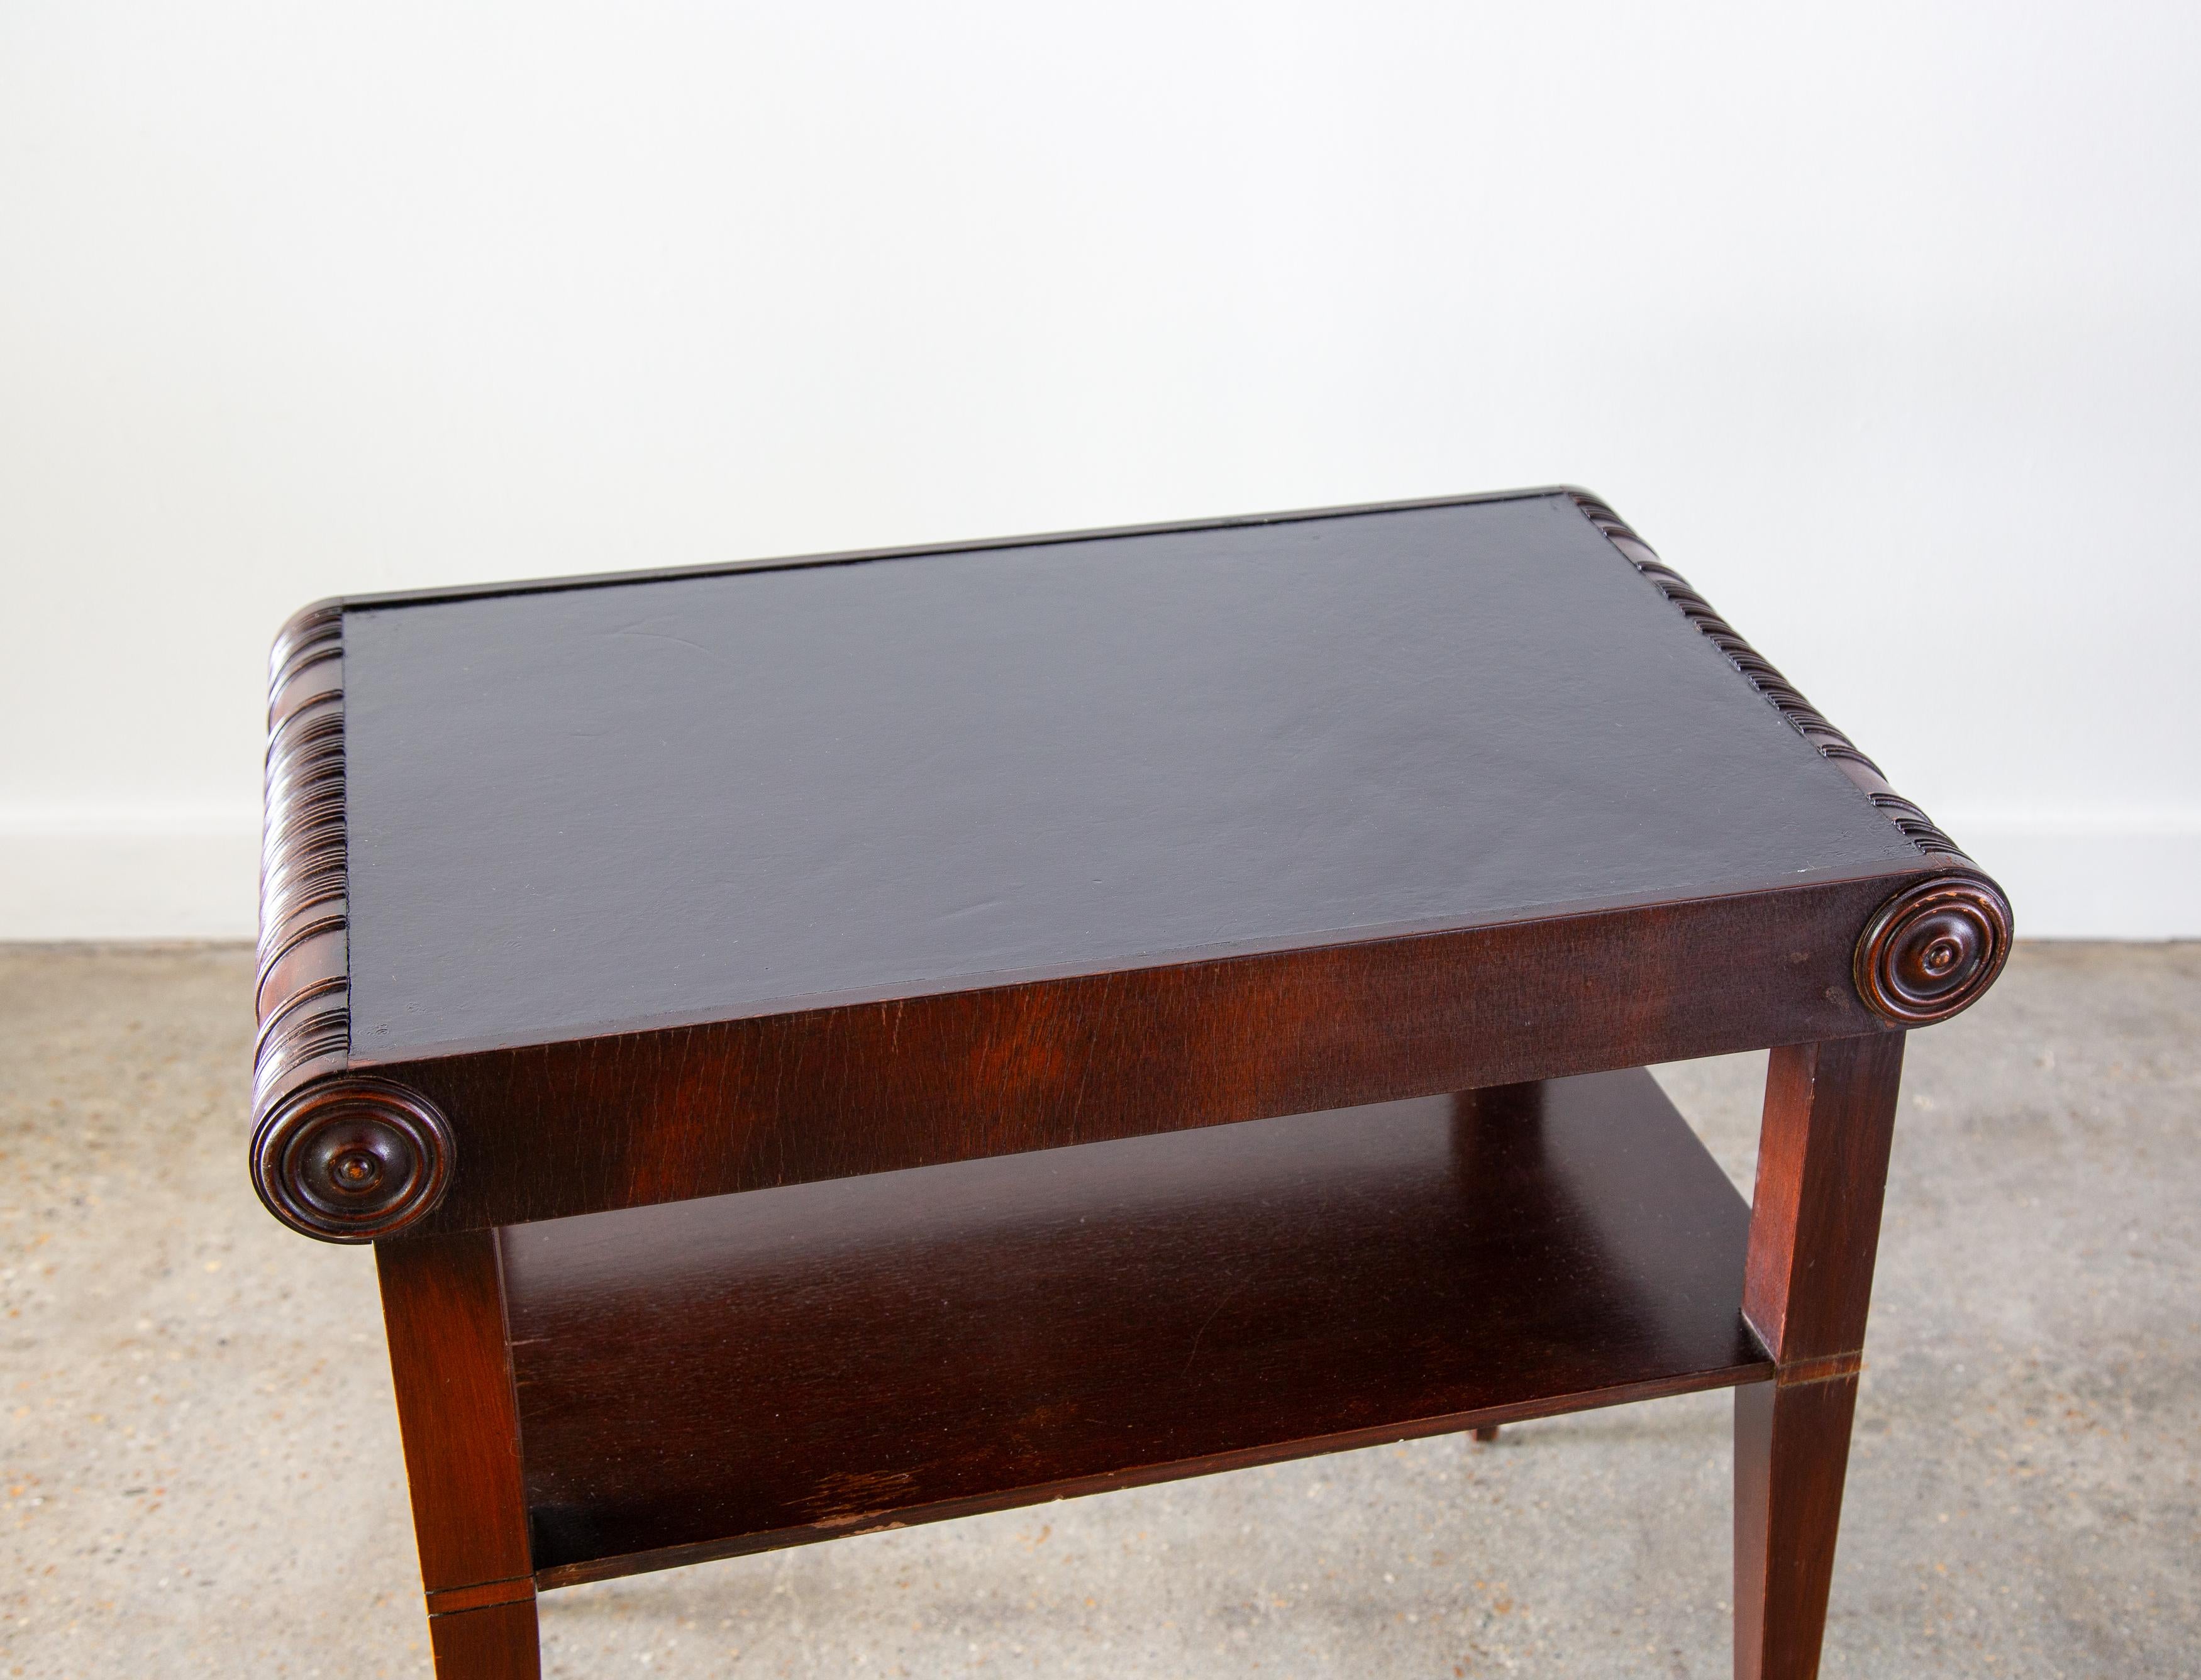 1920s Swedish Art Deco Leather top Mahogany End Tables Nightstands For Sale 5